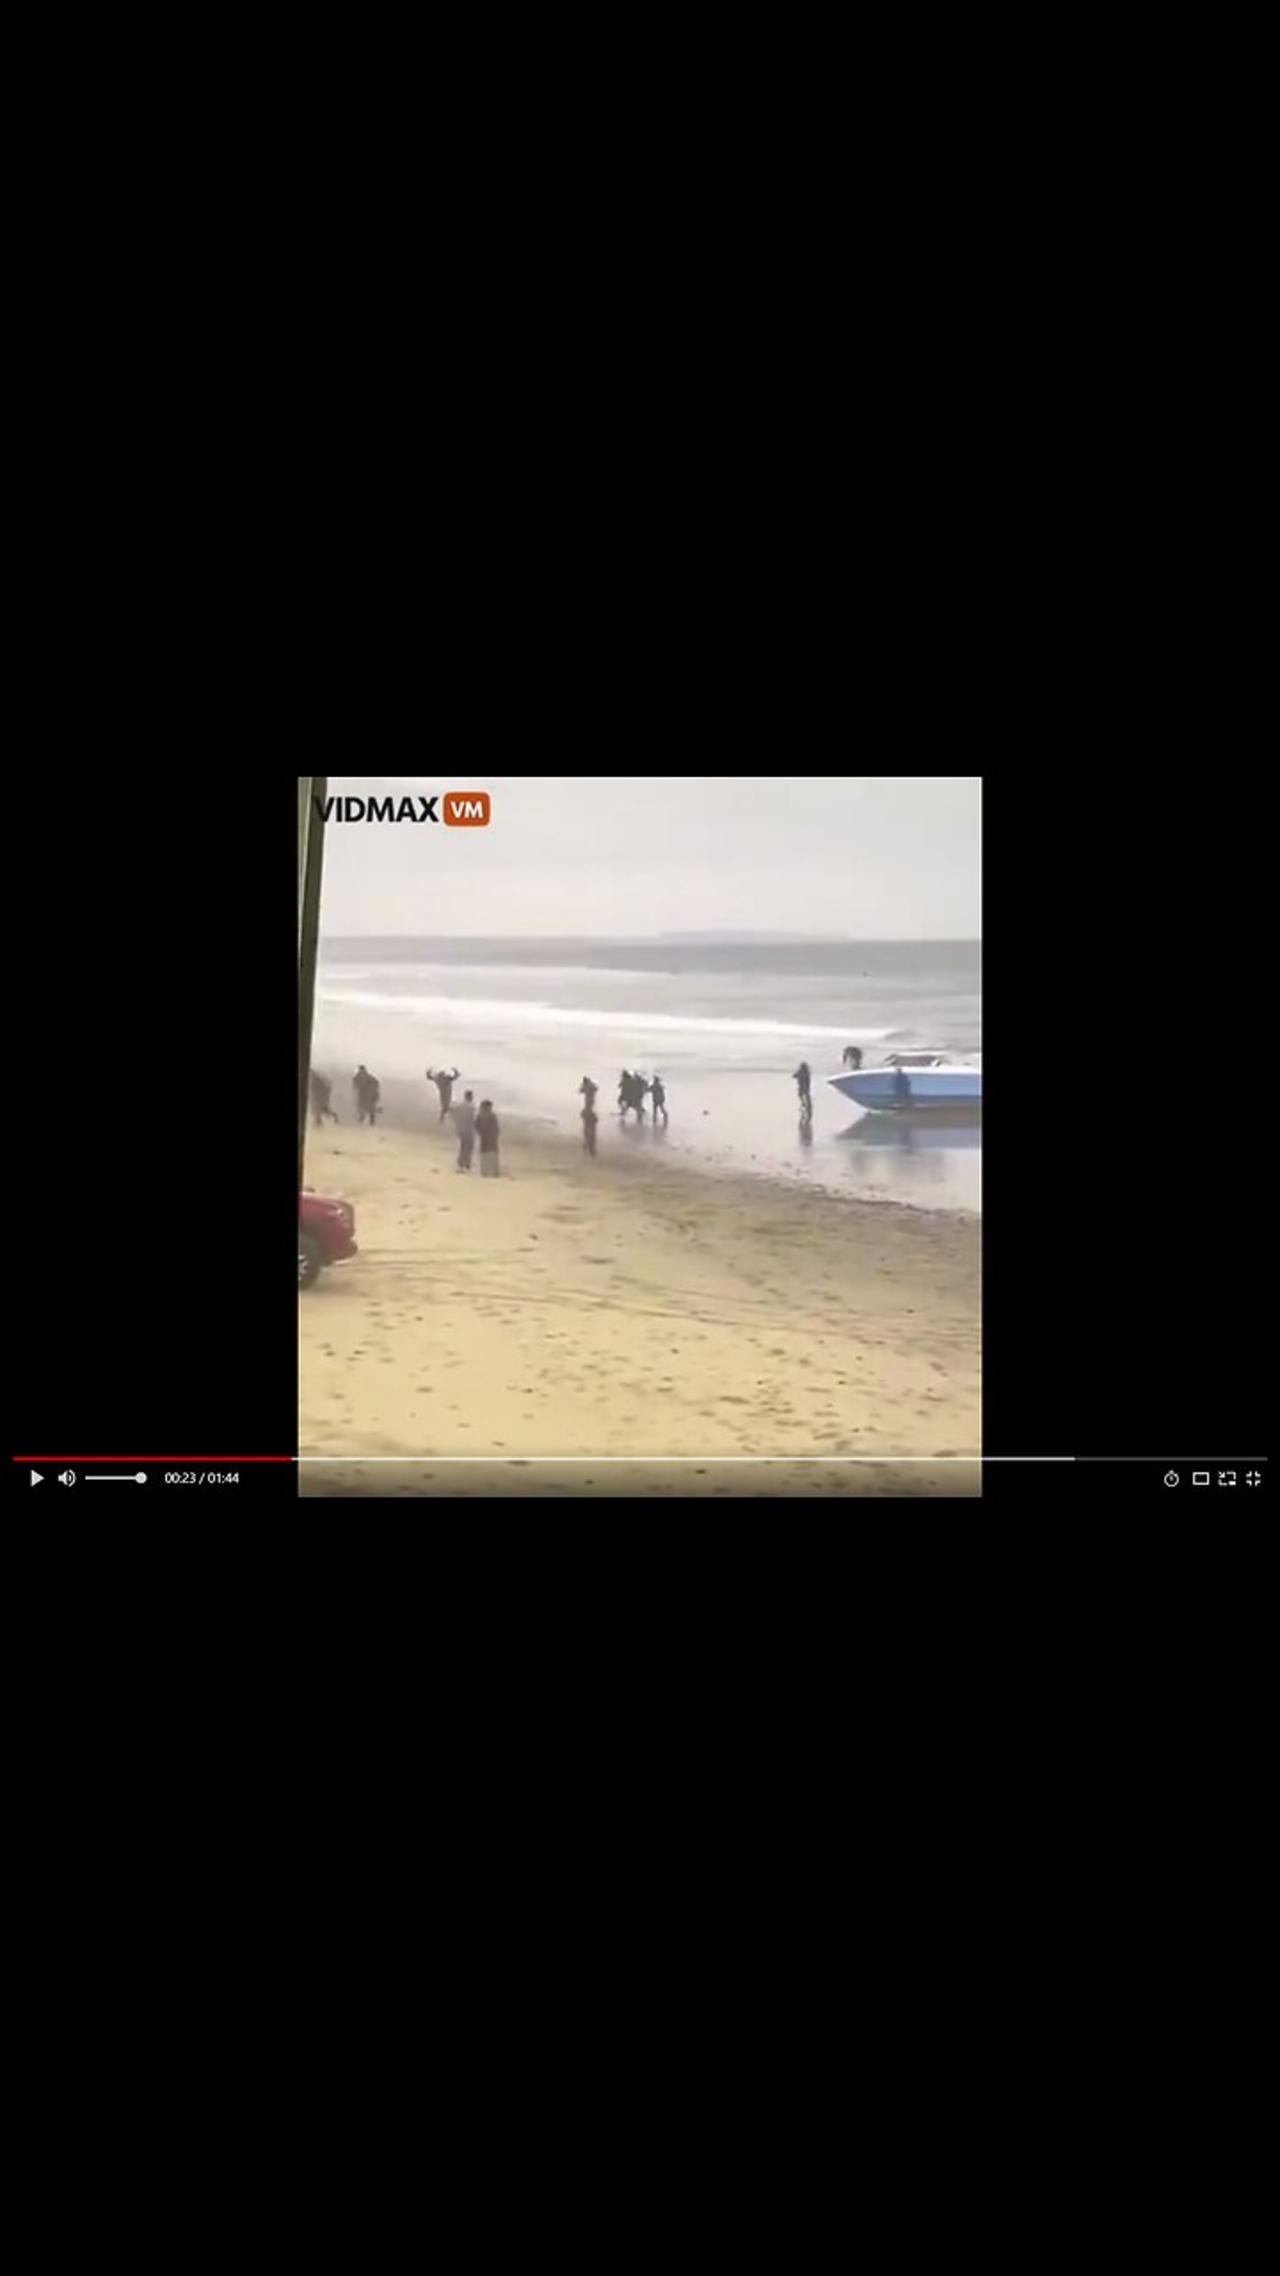 WATCH! CARLSBAD CALIFORNIA BEACHES JUST GOT INVADED BY MILITARY AGE MALES